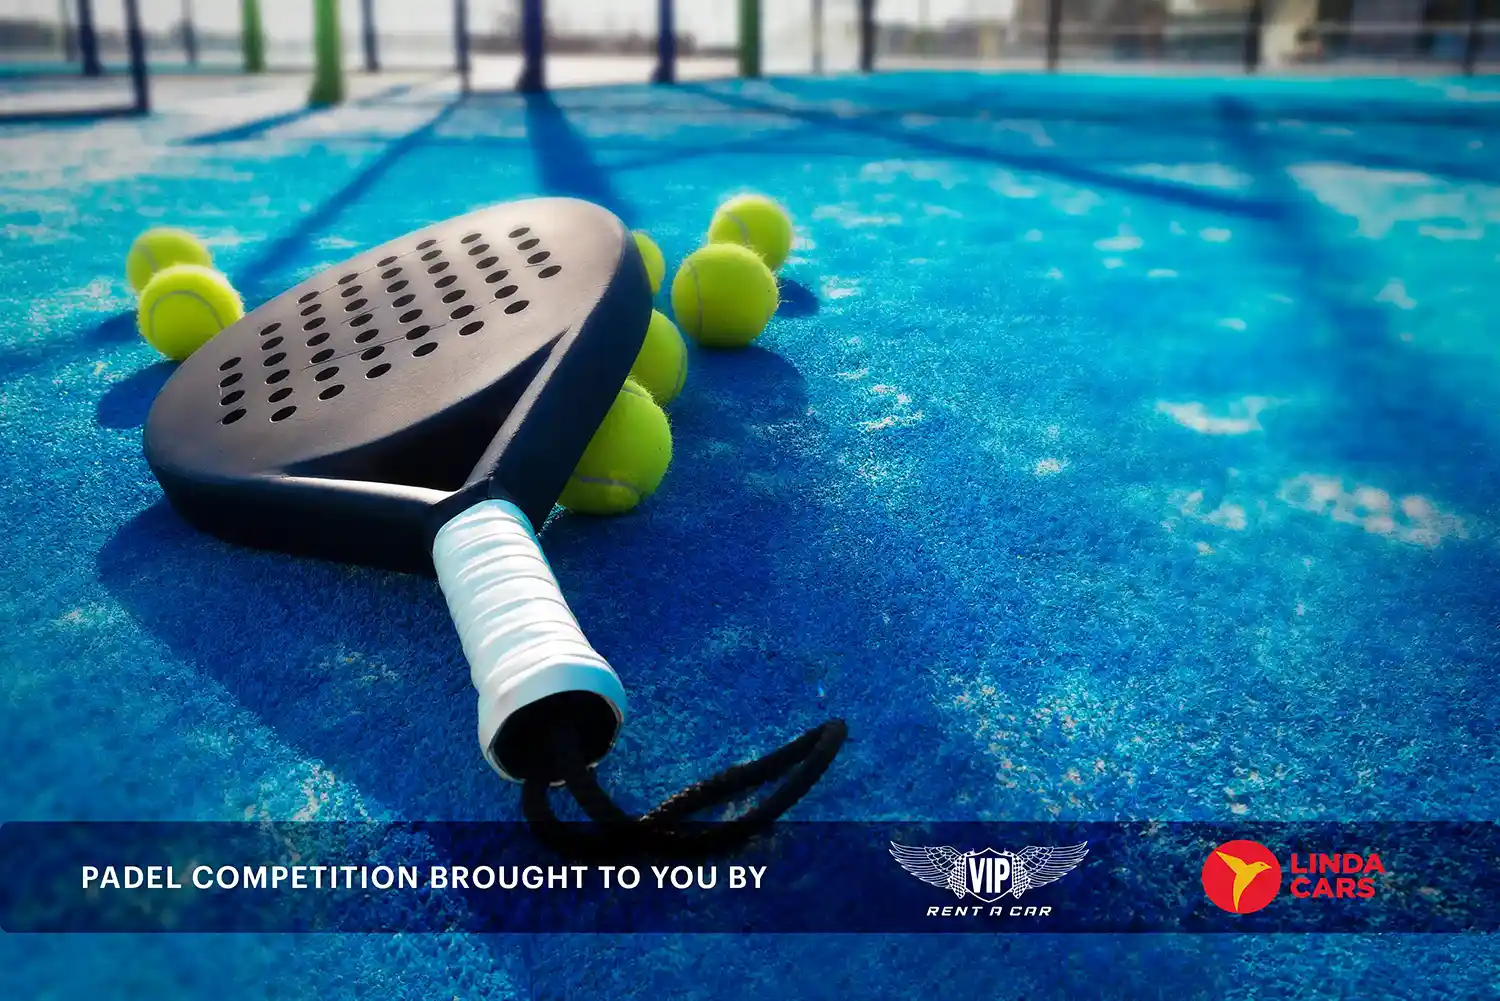 Driving the Padel Experience – Padel Competition Brought to You by VIP Rent a Car with Linda Cars